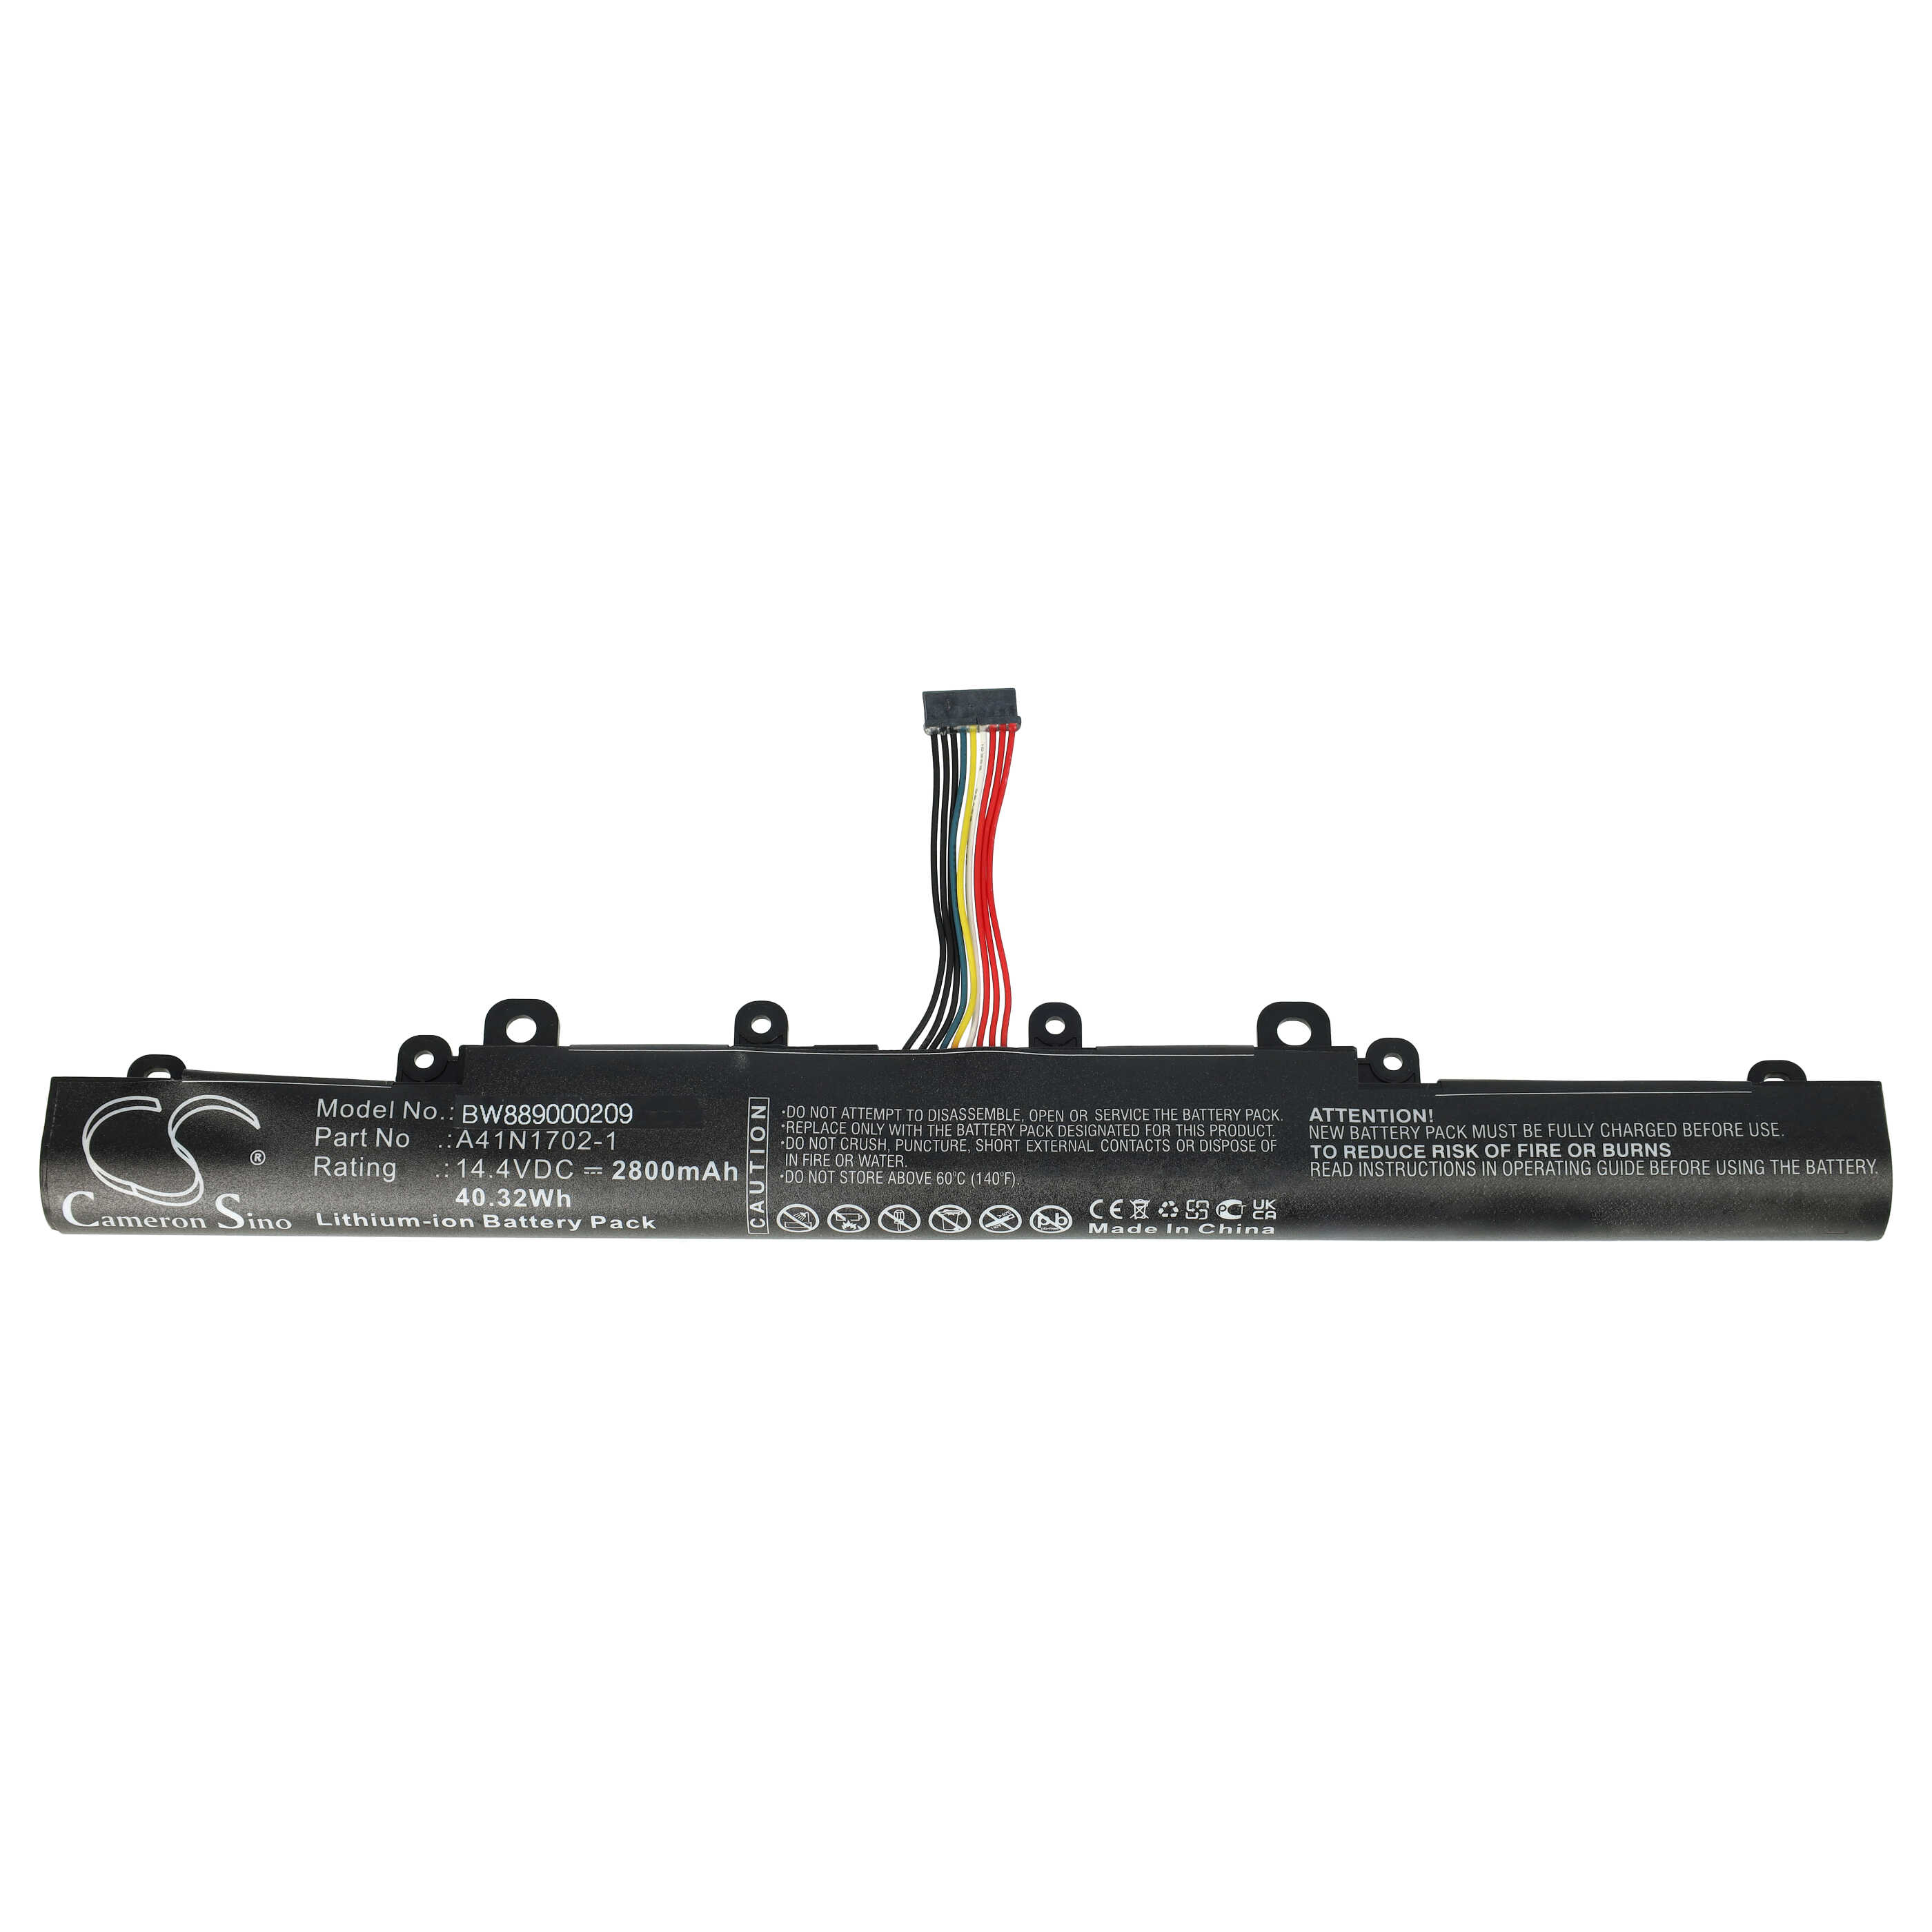 Notebook Battery Replacement for Asus A41lj5H, 0B110-00480100, A41N1702-1 - 2800 mAh 14.4 V Li-Ion